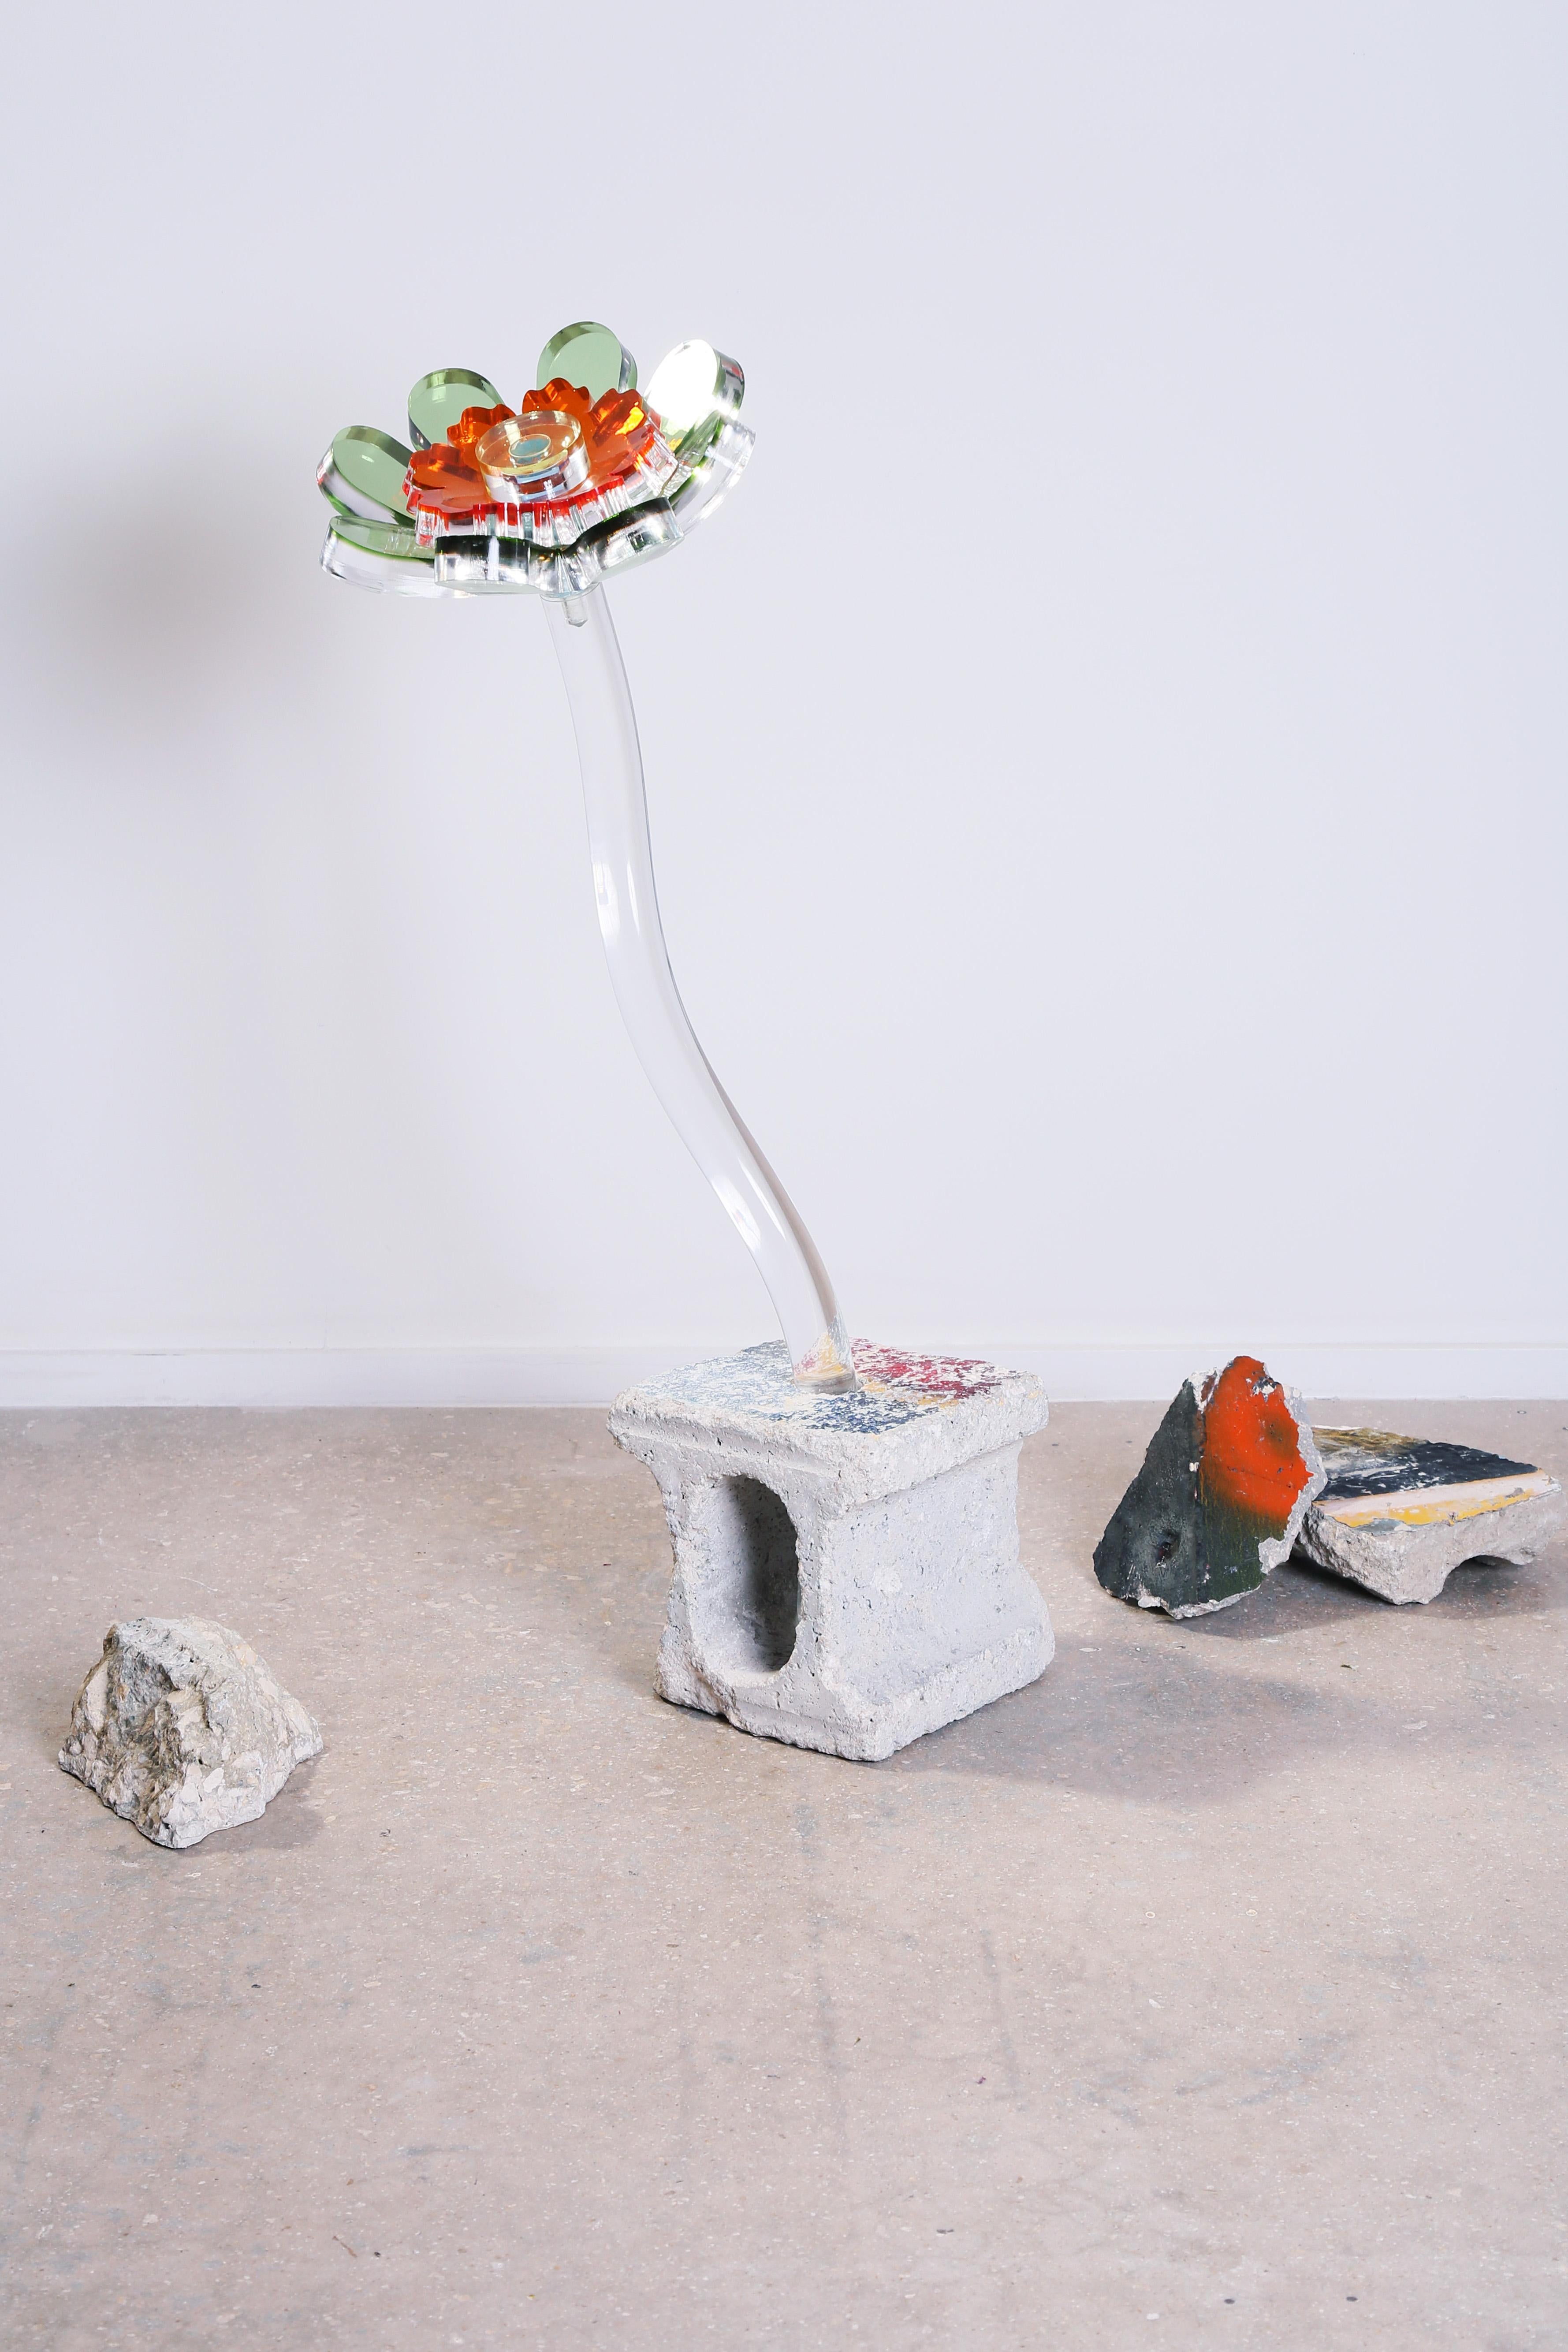 The Flora sculptures are part of the Fossils series. Oversized acrylic flower sculptures are combined with repurposed painted concrete rubble from demolished buildings, allowing the artist to pay tribute to the past, while looking to the future. In